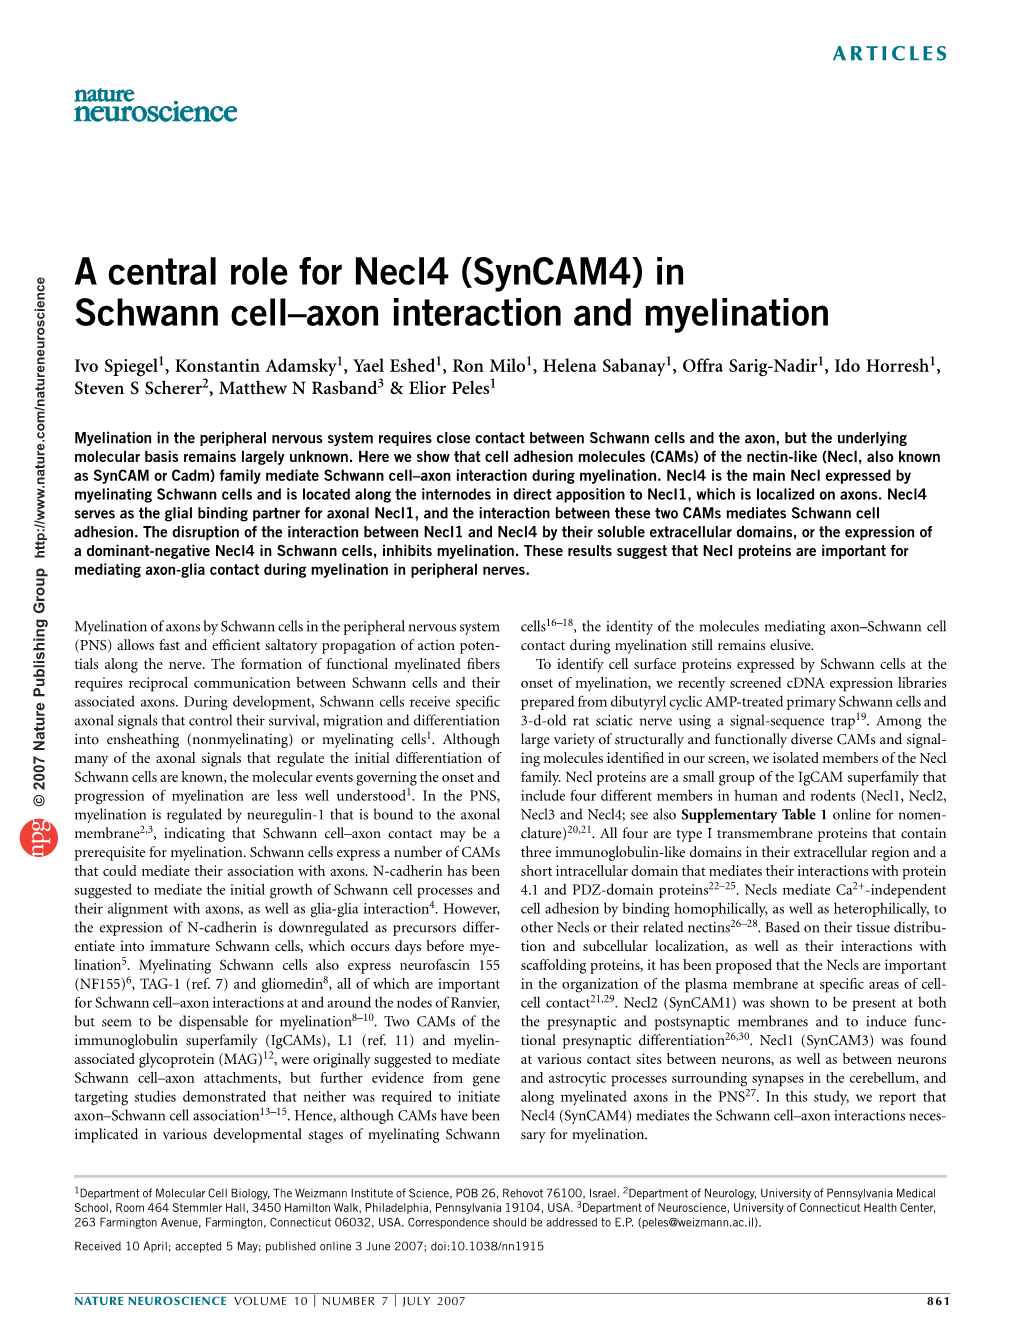 A Central Role for Necl4 (Syncam4) in Schwann Cell–Axon Interaction and Myelination